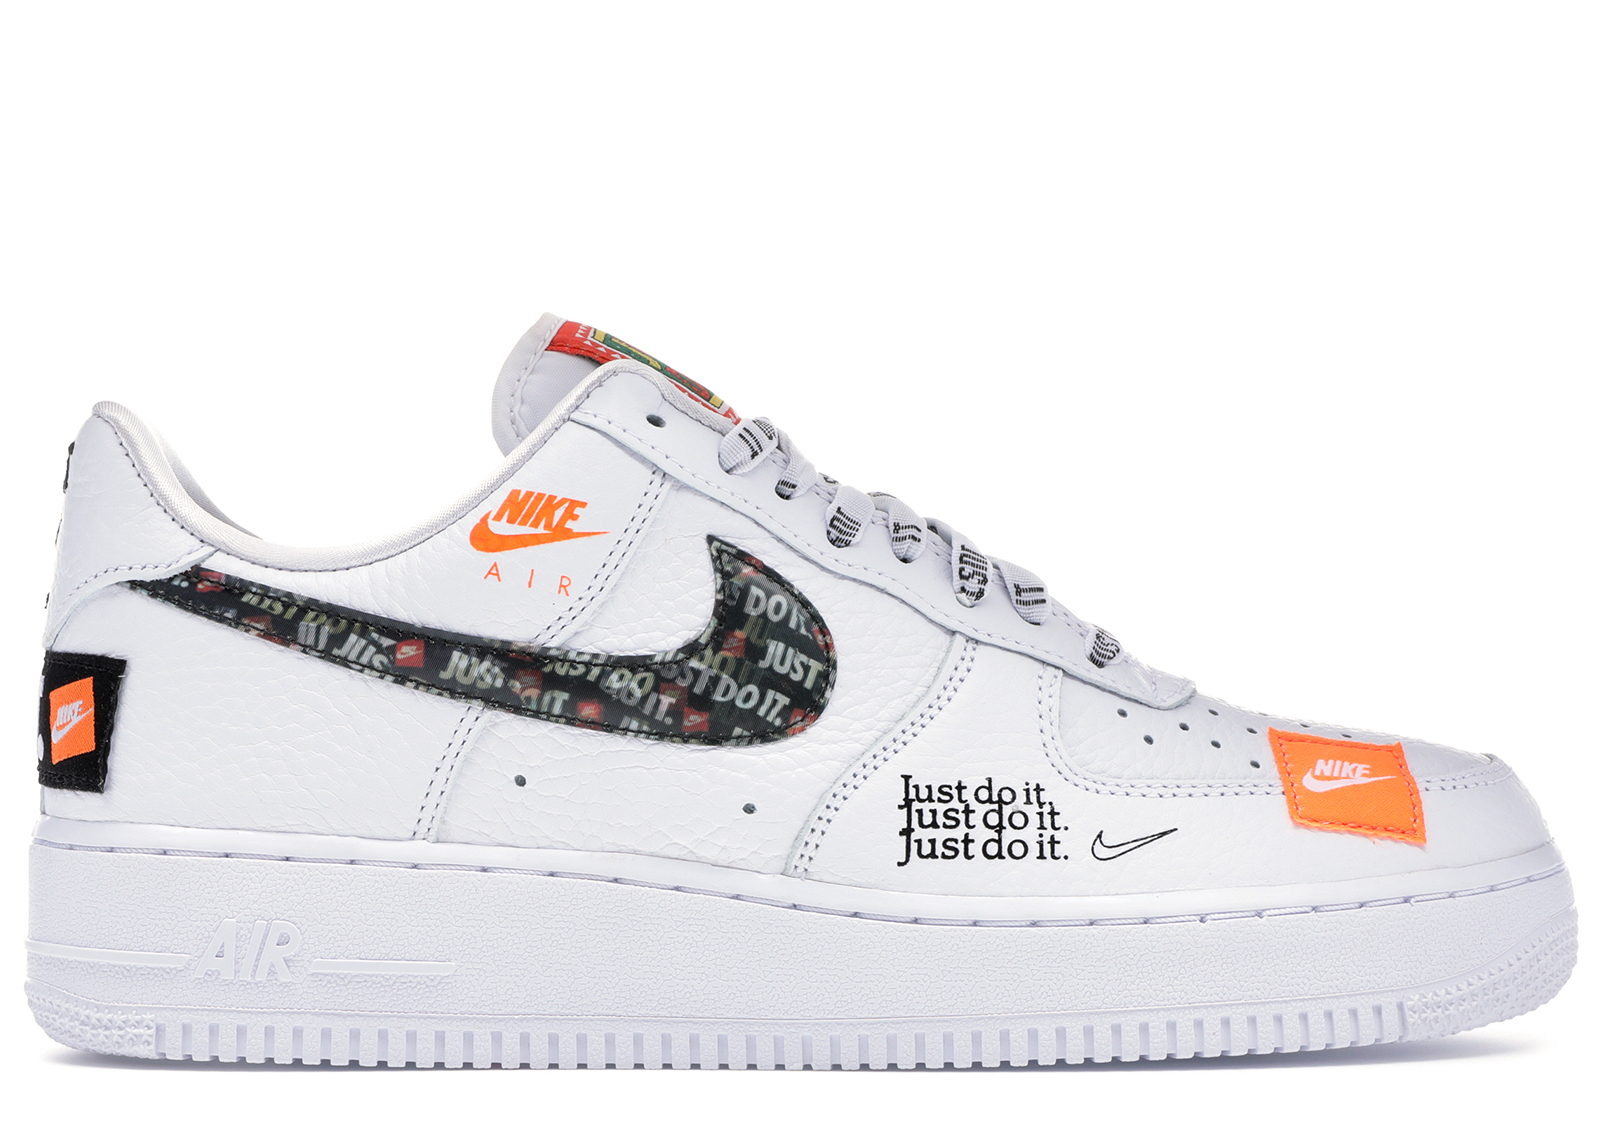 Nike Air Force 1 Low Just Do It Pack White/Black Men's - AR7719 